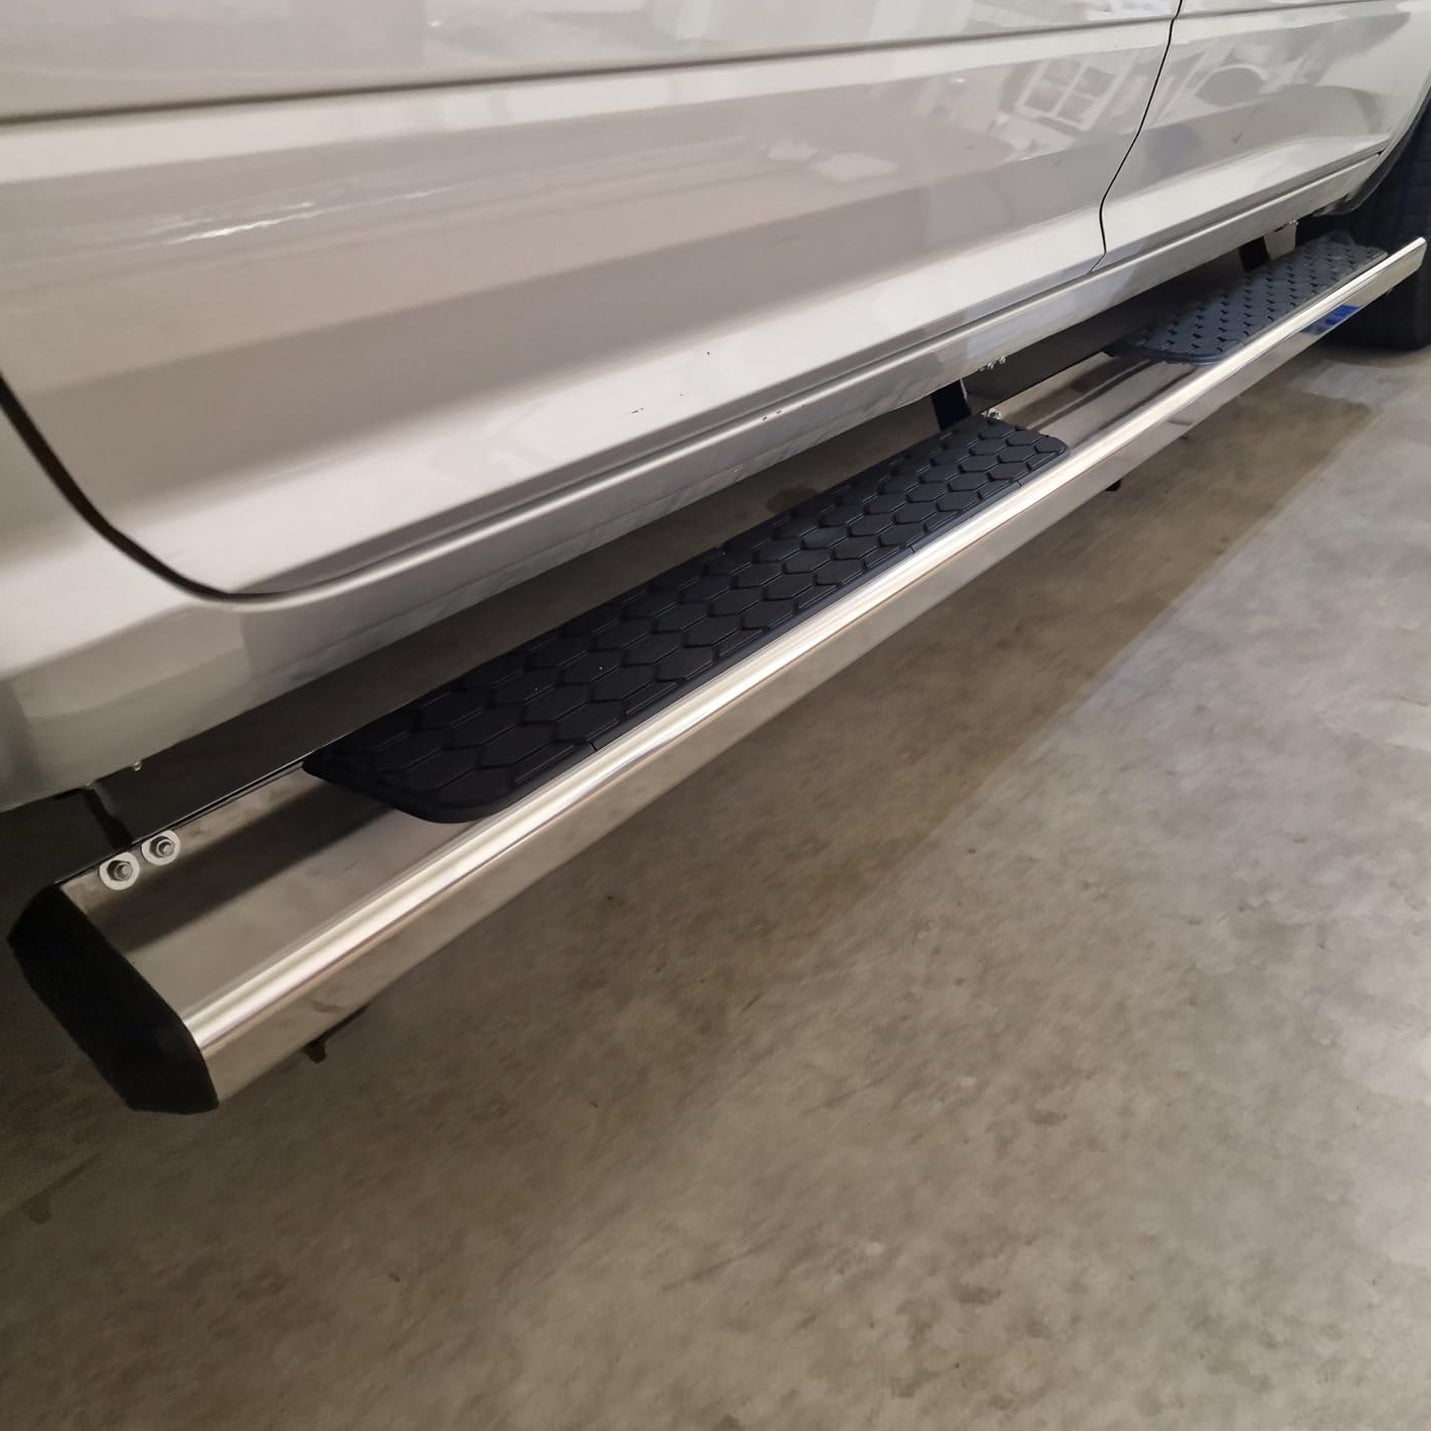 Stainless Steel Running Boards Compatible with 2007-2018 Chevy Silverado/GMC Sierra 1500 2500 3500 Crew Cab & 2019 Silverado/Sierra 2500HD 3500HD Crew Cab DH6 Style.-COMNOVA AUTOPART